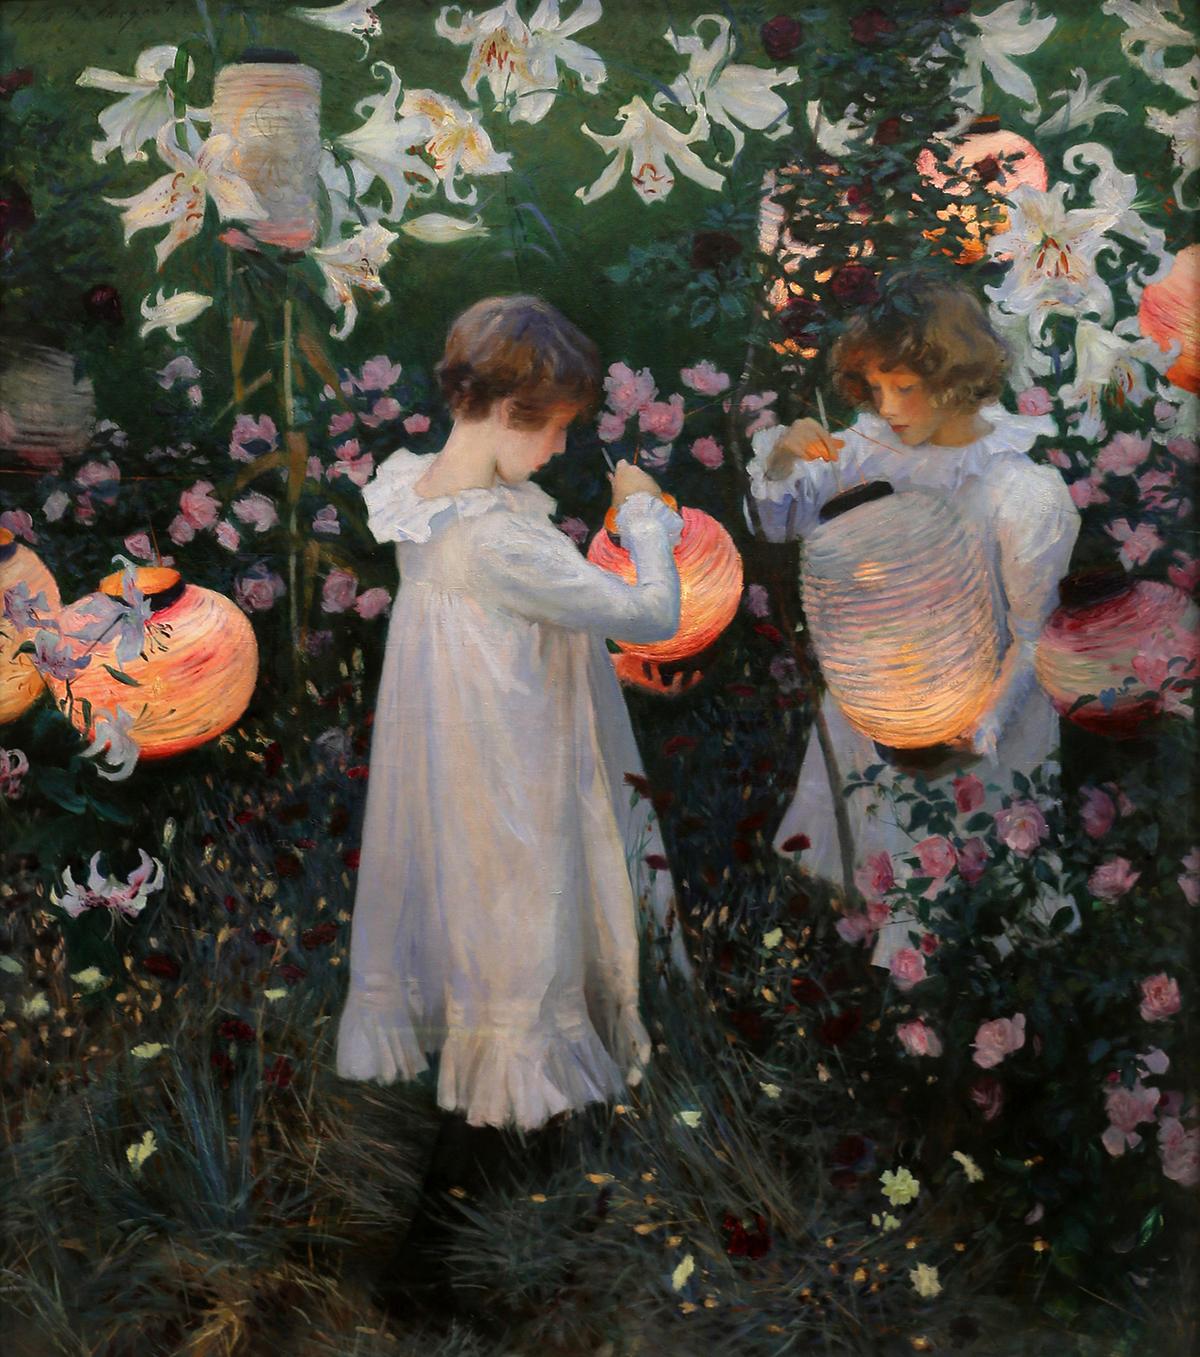 "Carnation, Lily, Lily, Rose," between 1885 and 1886, by John Singer Sargent. Oil on canvas; 60 1/2 inches by 68 1/2 inches. Tate Britain, London. (<a href="https://commons.wikimedia.org/wiki/File:John_singer_sargent,_carnation,_lily,_lily,_rose,_1885-86,_01.jpg" target="_blank" rel="nofollow noopener">Sailko</a>/<a href="https://creativecommons.org/licenses/by/4.0/deed.en">CC BY 4.0 Deed</a>)